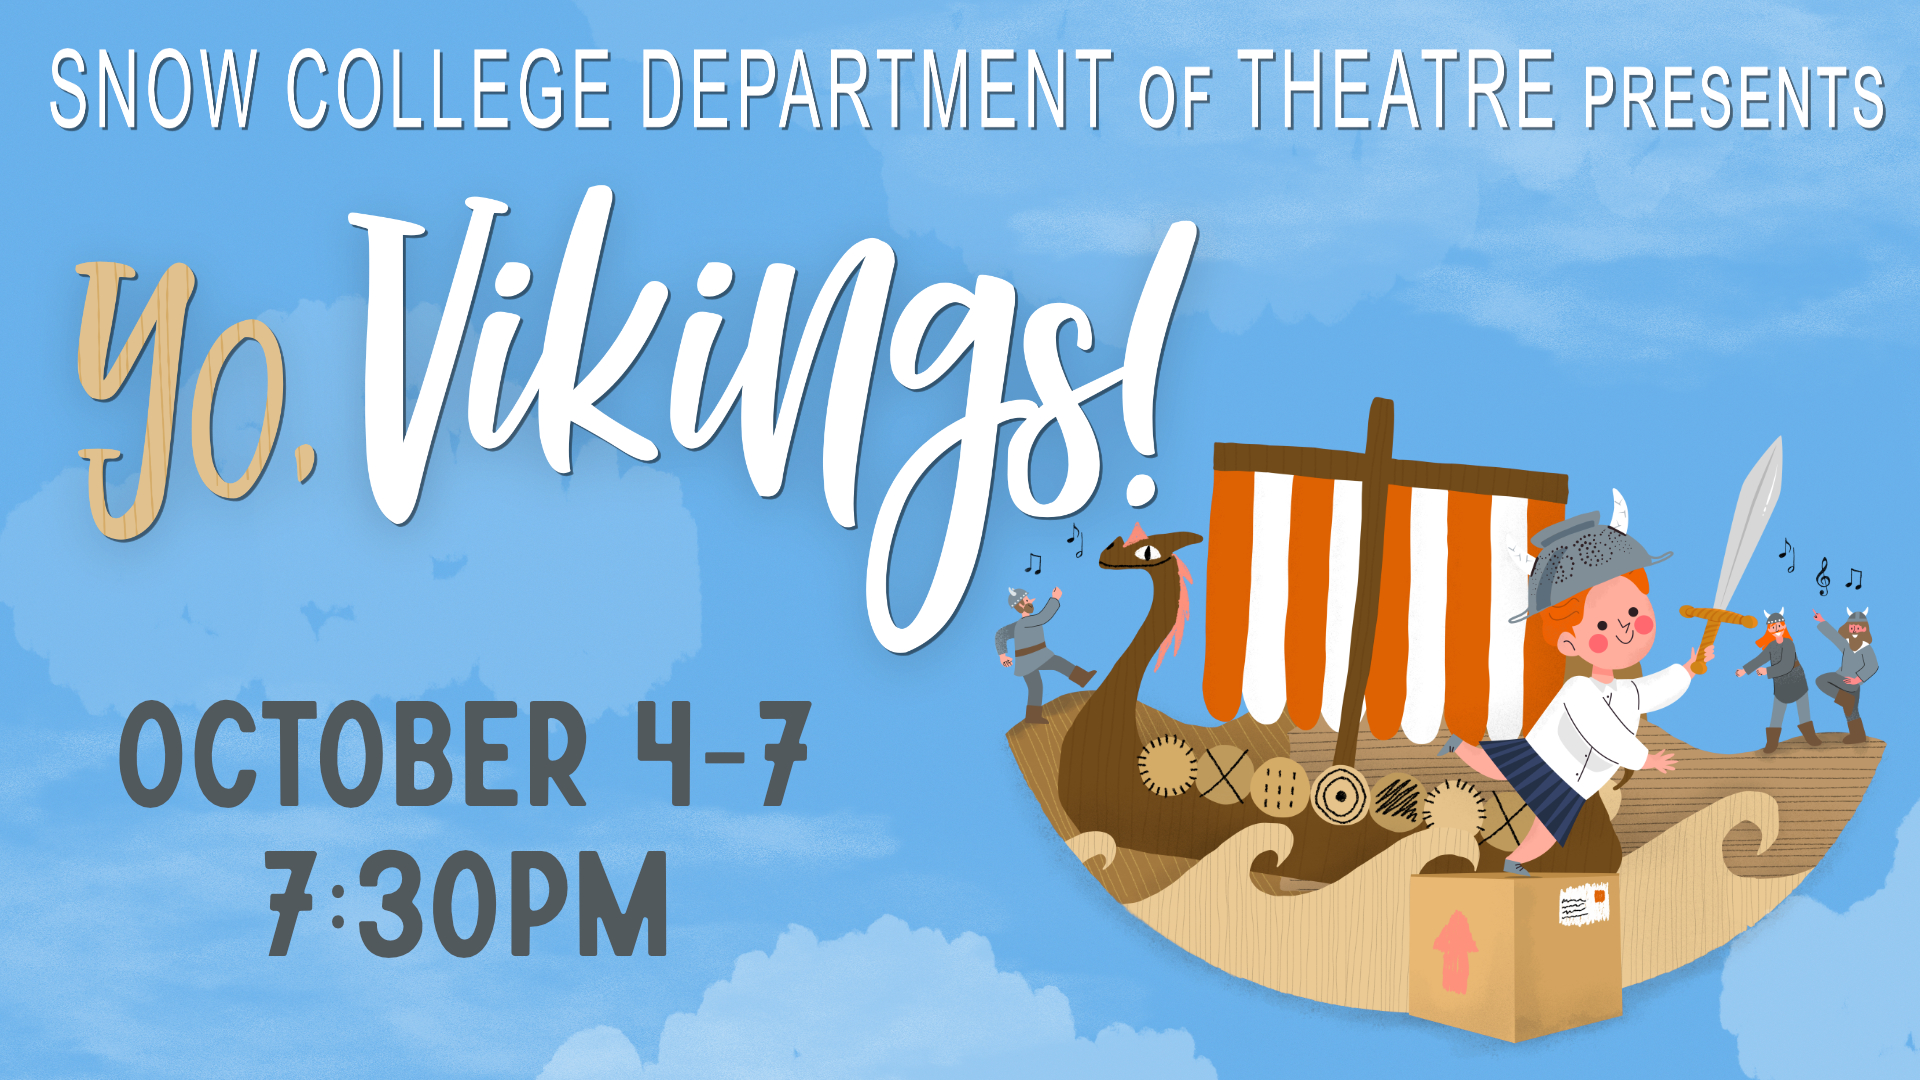 Snow College Department of Theatre Presents Yo Vikings! October 4-7, 7:30pm